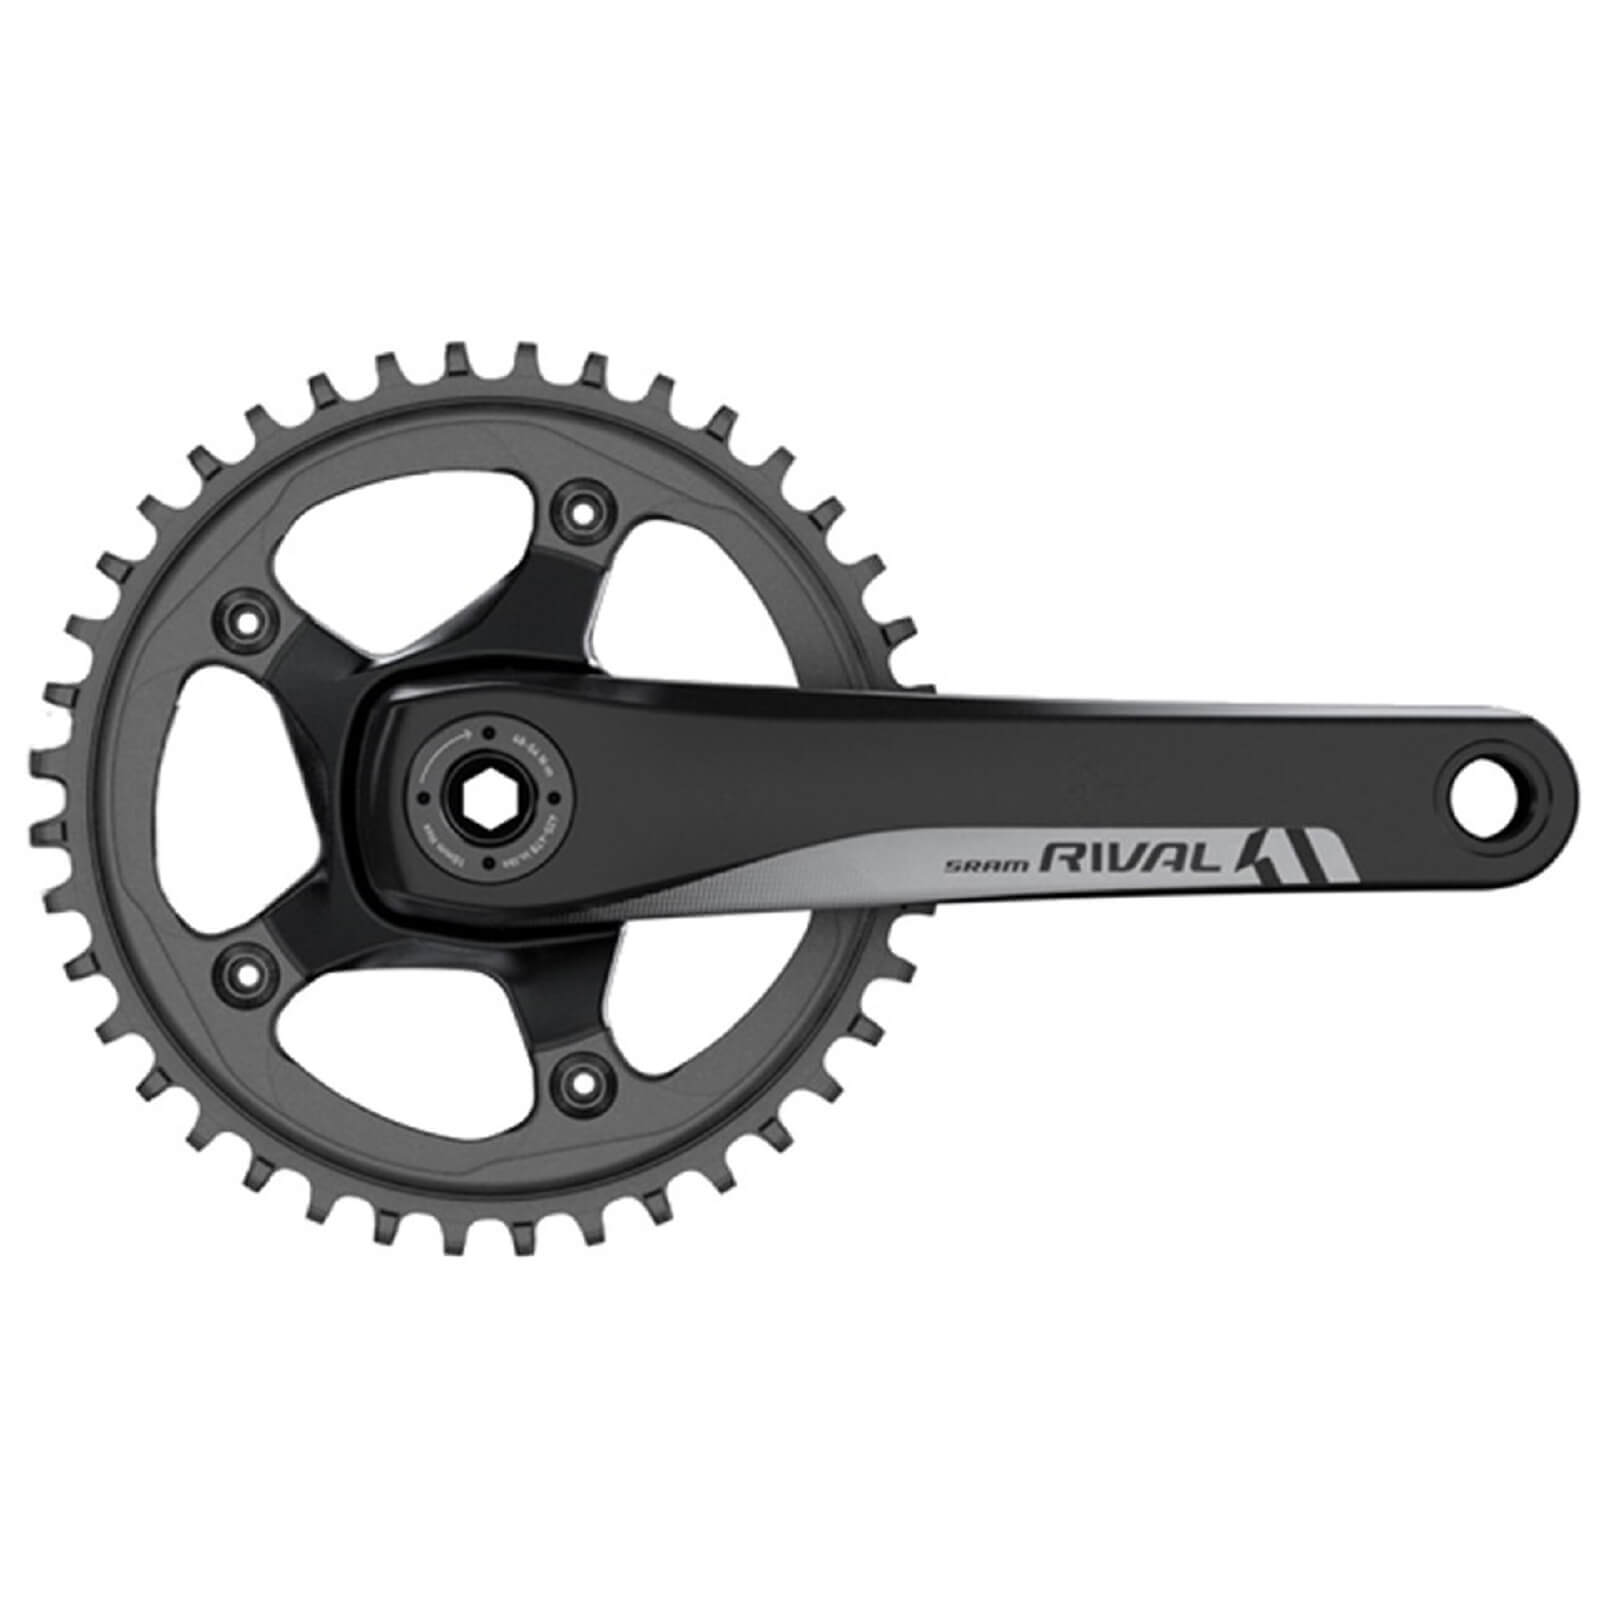 SRAM Rival1 GXP Chainset - 42T - 170mm